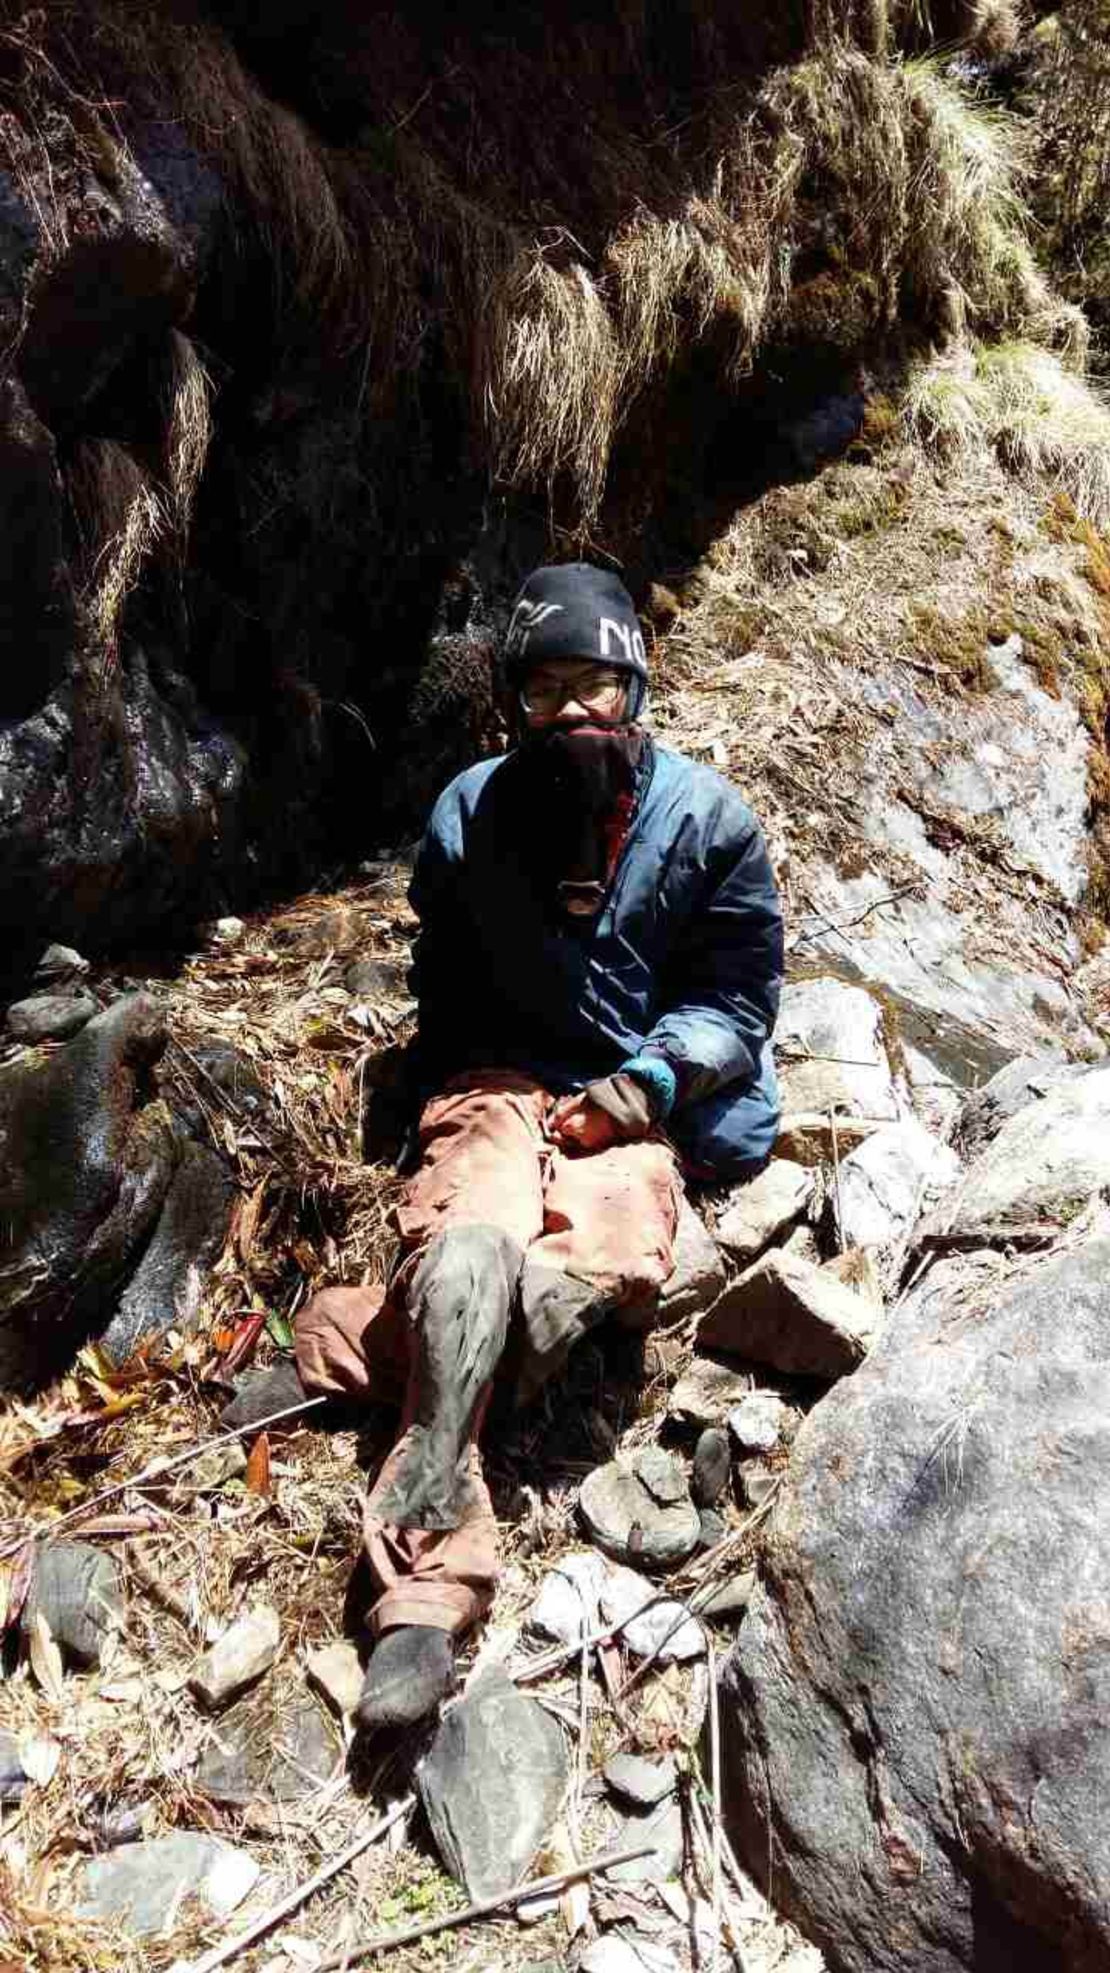 Taiwanese hiker Liang Sheng-yue, seen at the site of his rescue. He was conscious when the search party found him, but "very tired," and had lost 30 kg over the 47 days in the wilderness. 